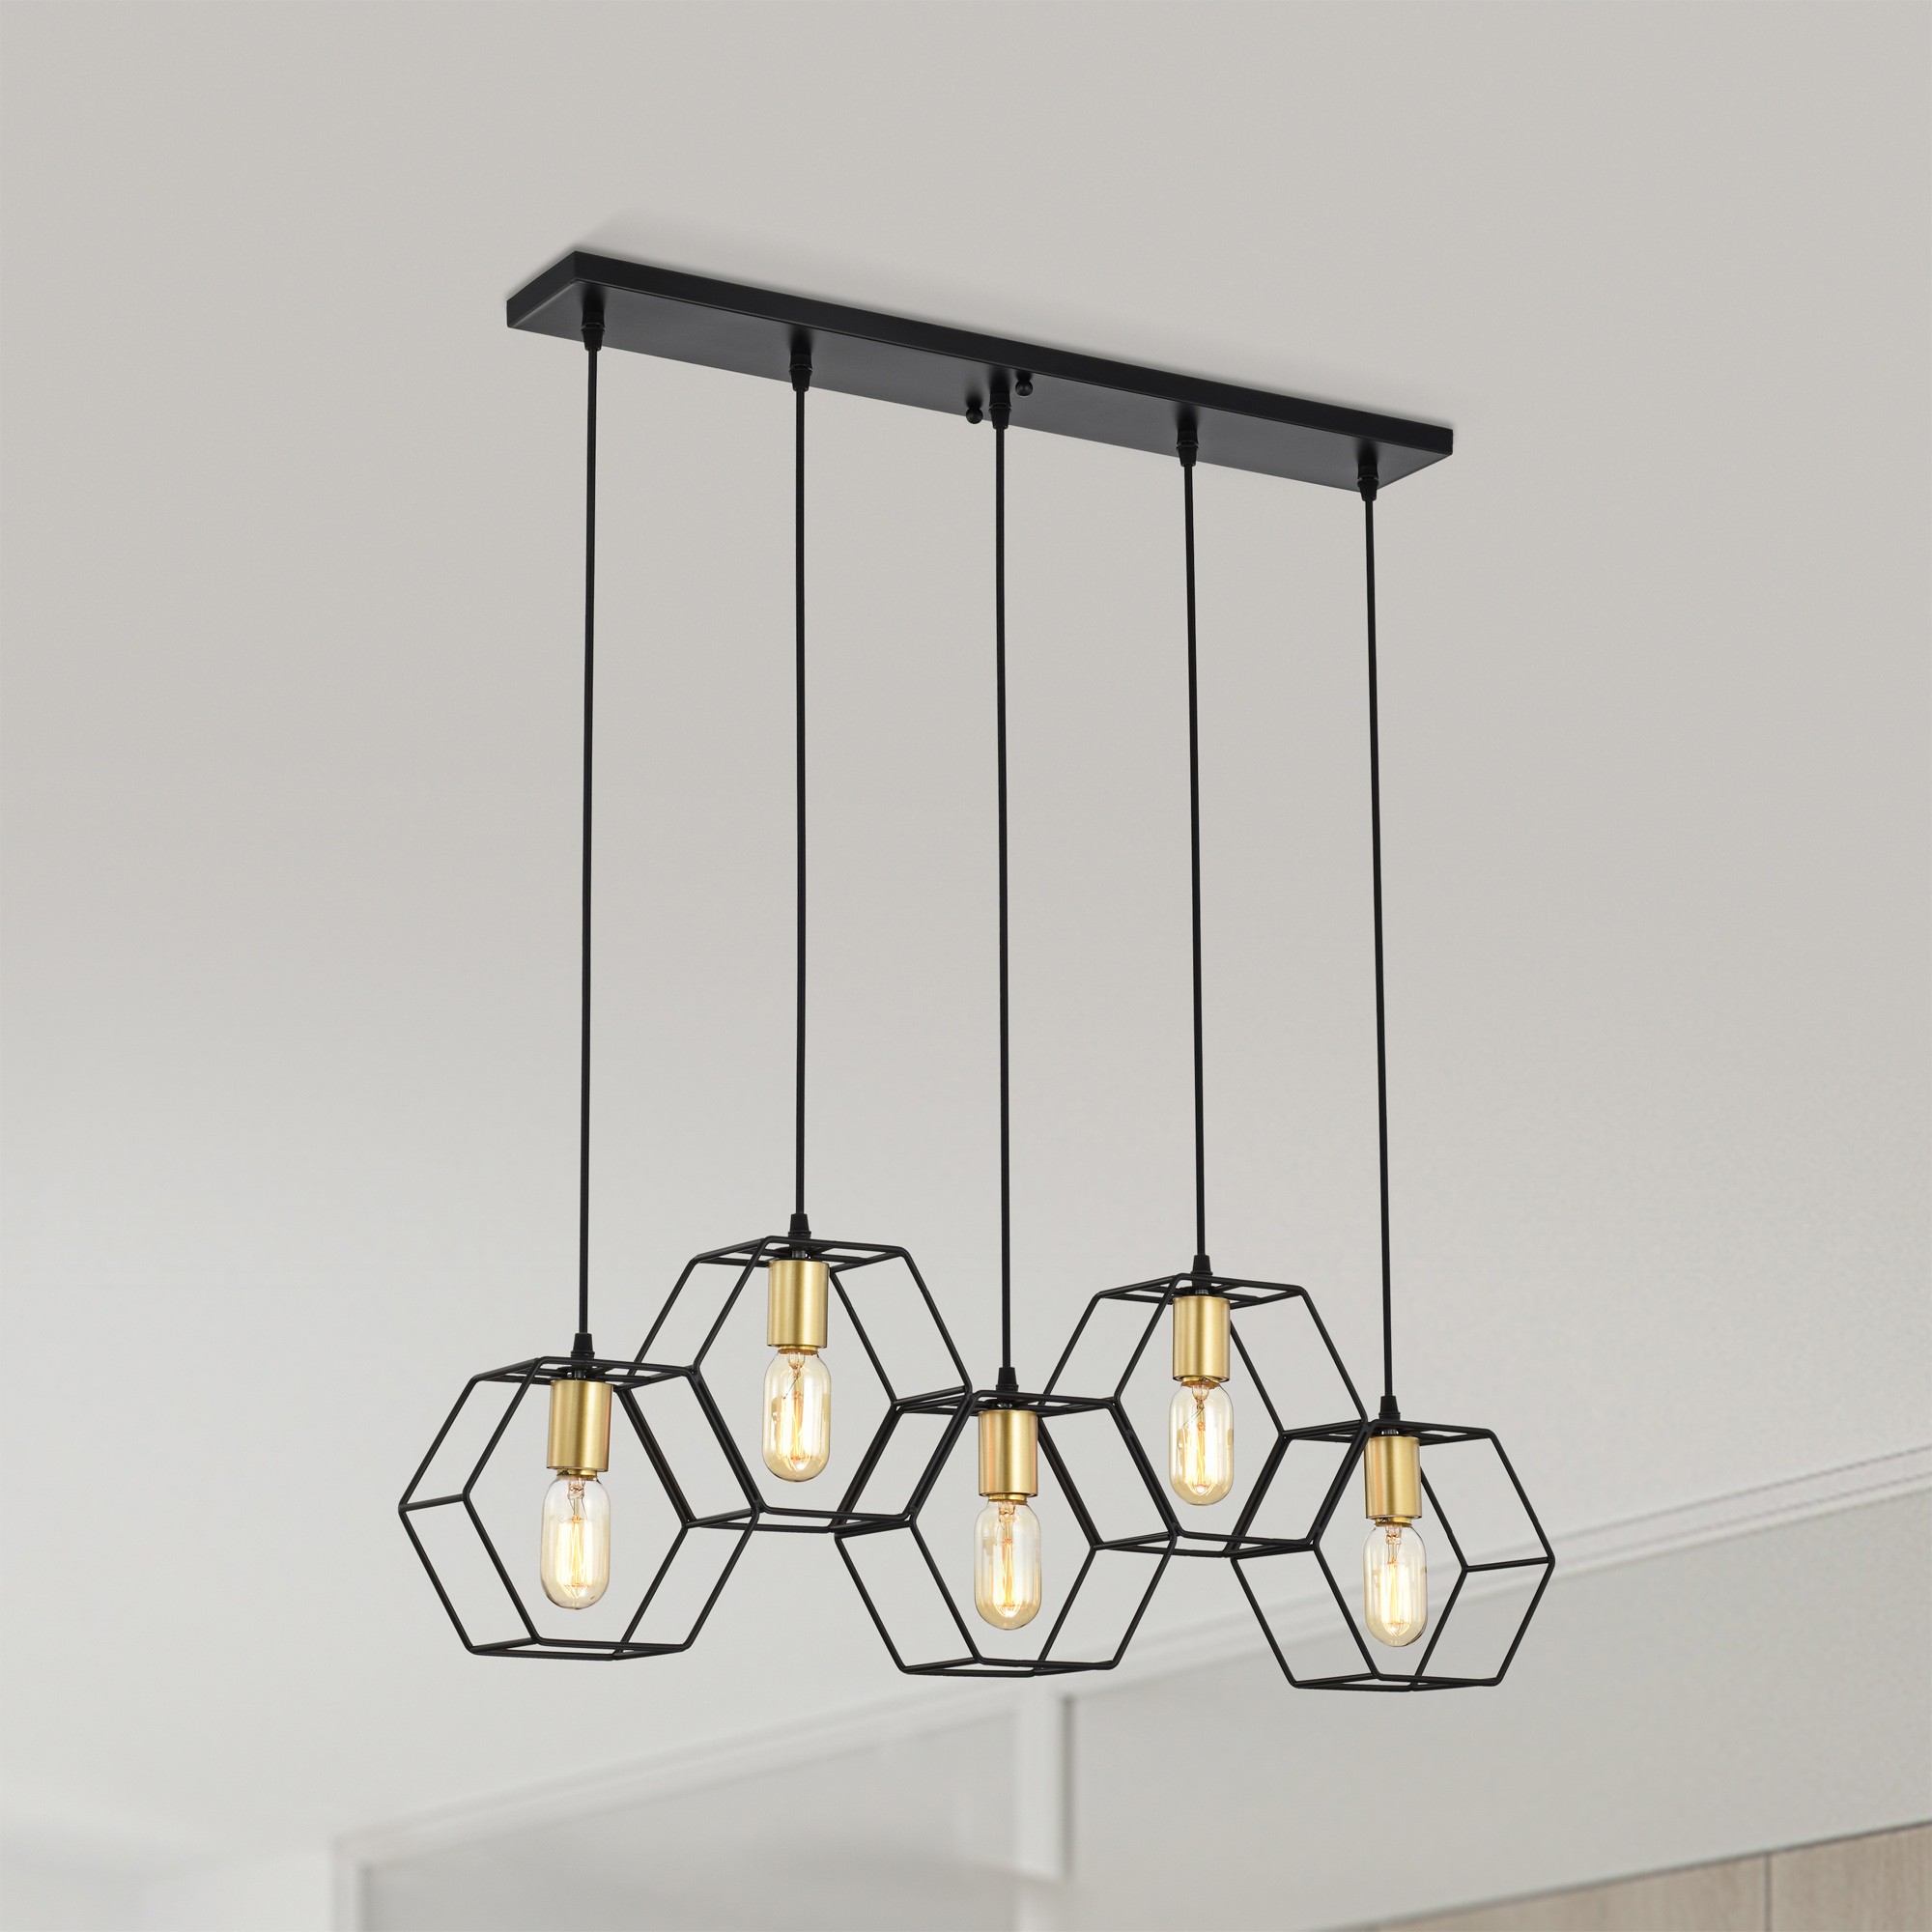 Berenice 33 in. 5-Light Indoor Matte Black and Satin Gold Finish Chandelier with Light Kit